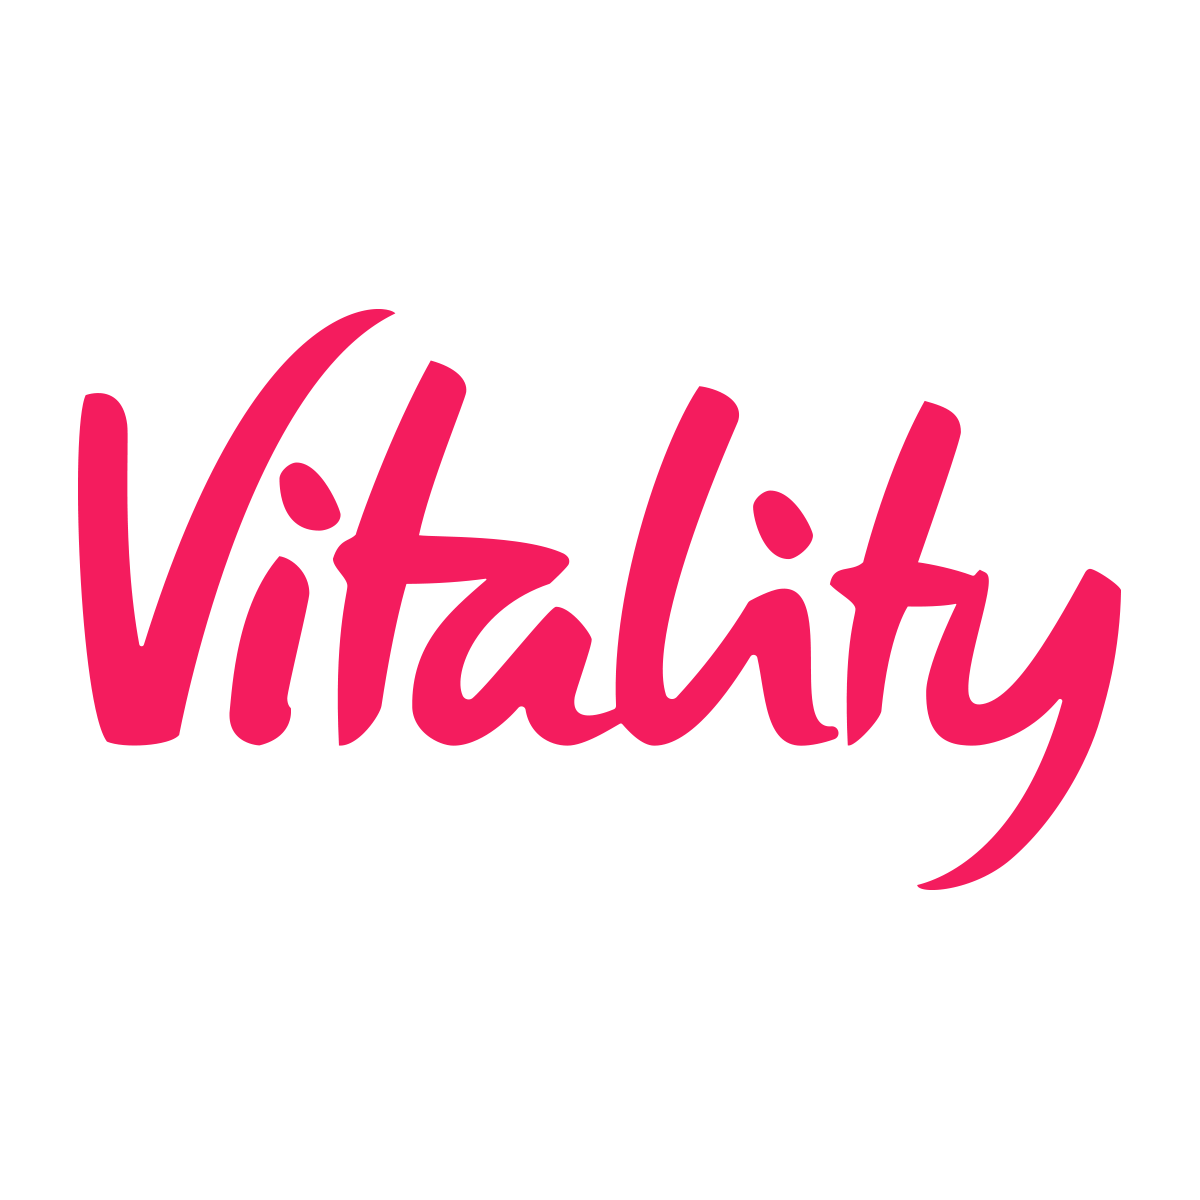 Vitality launcVitality calls on businesses to help employees engage with health and wellbeing initiativeshes optional mental health cover